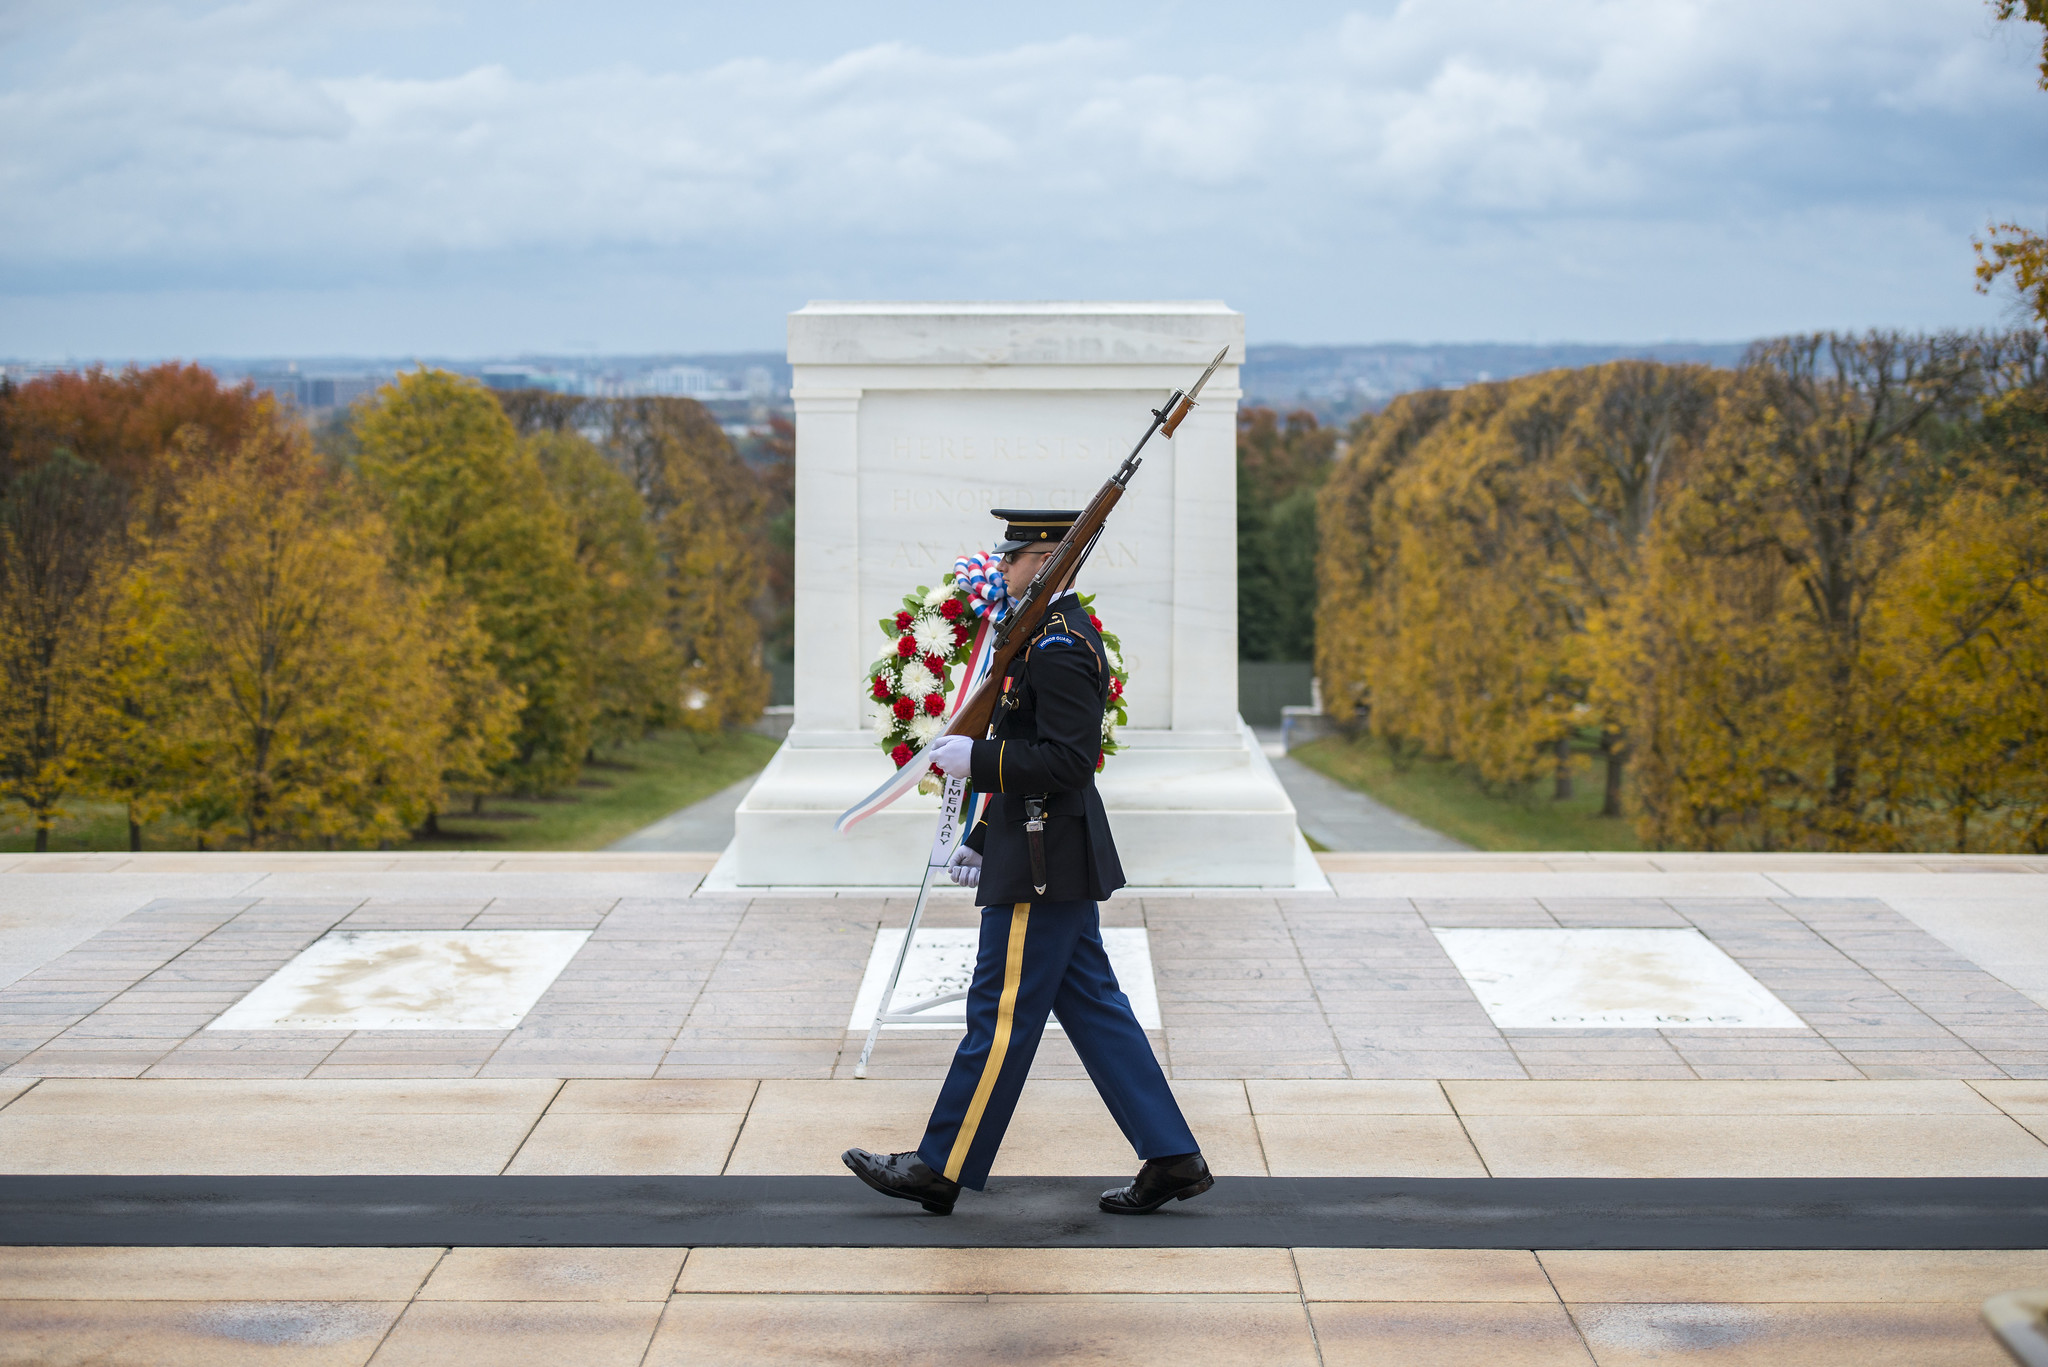 A sentinel guarding the Tomb of the Unknown Soldier, Arlington National Cemetery